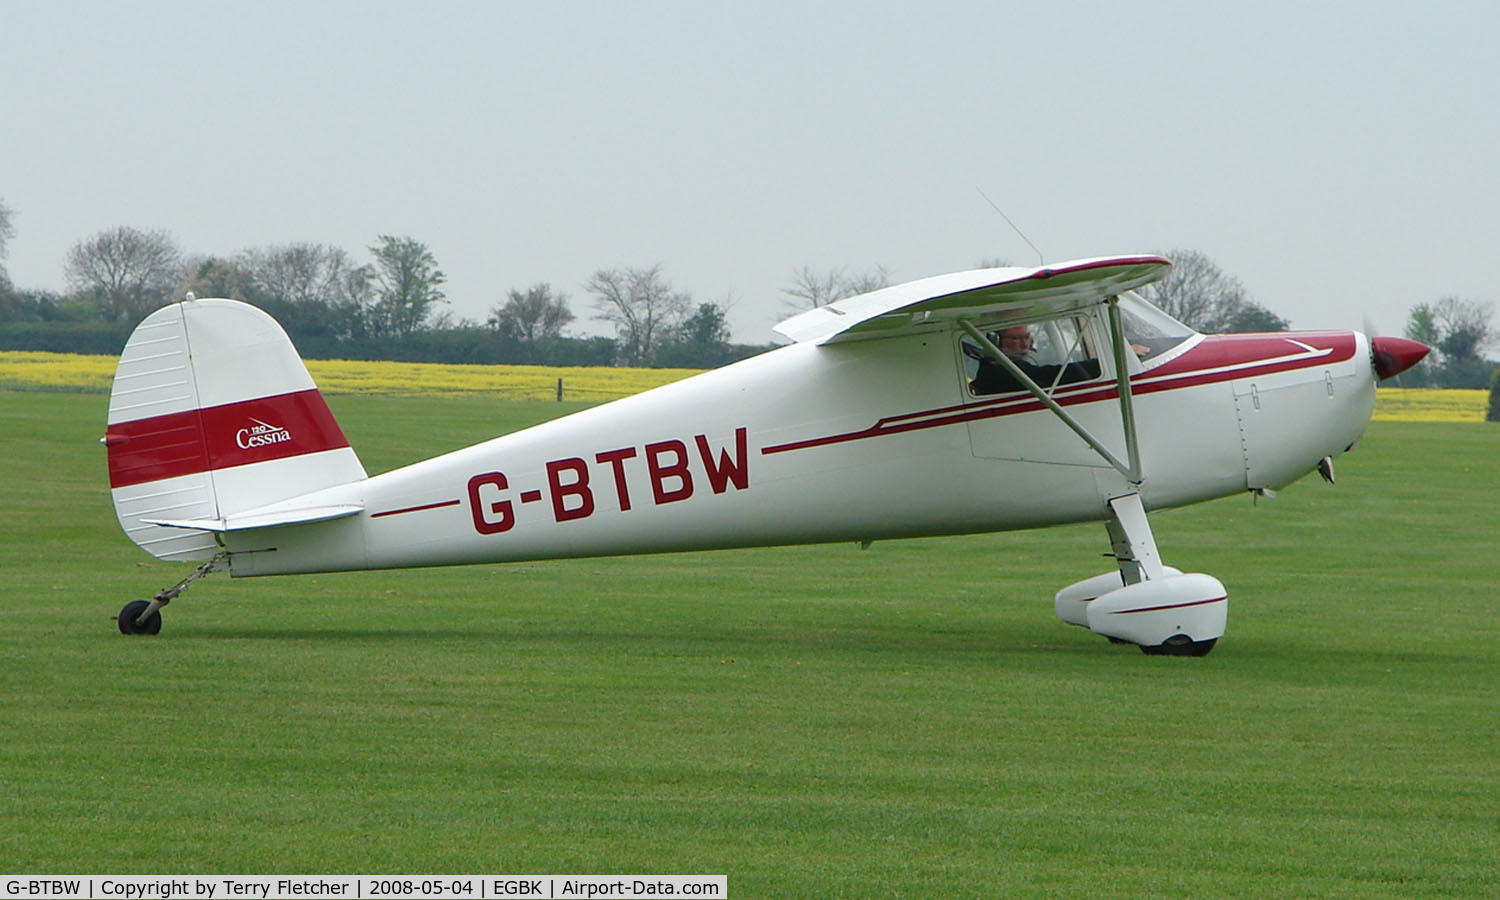 G-BTBW, 1947 Cessna 120 C/N 14220, Classic Cessna 120 is now based at Sywell